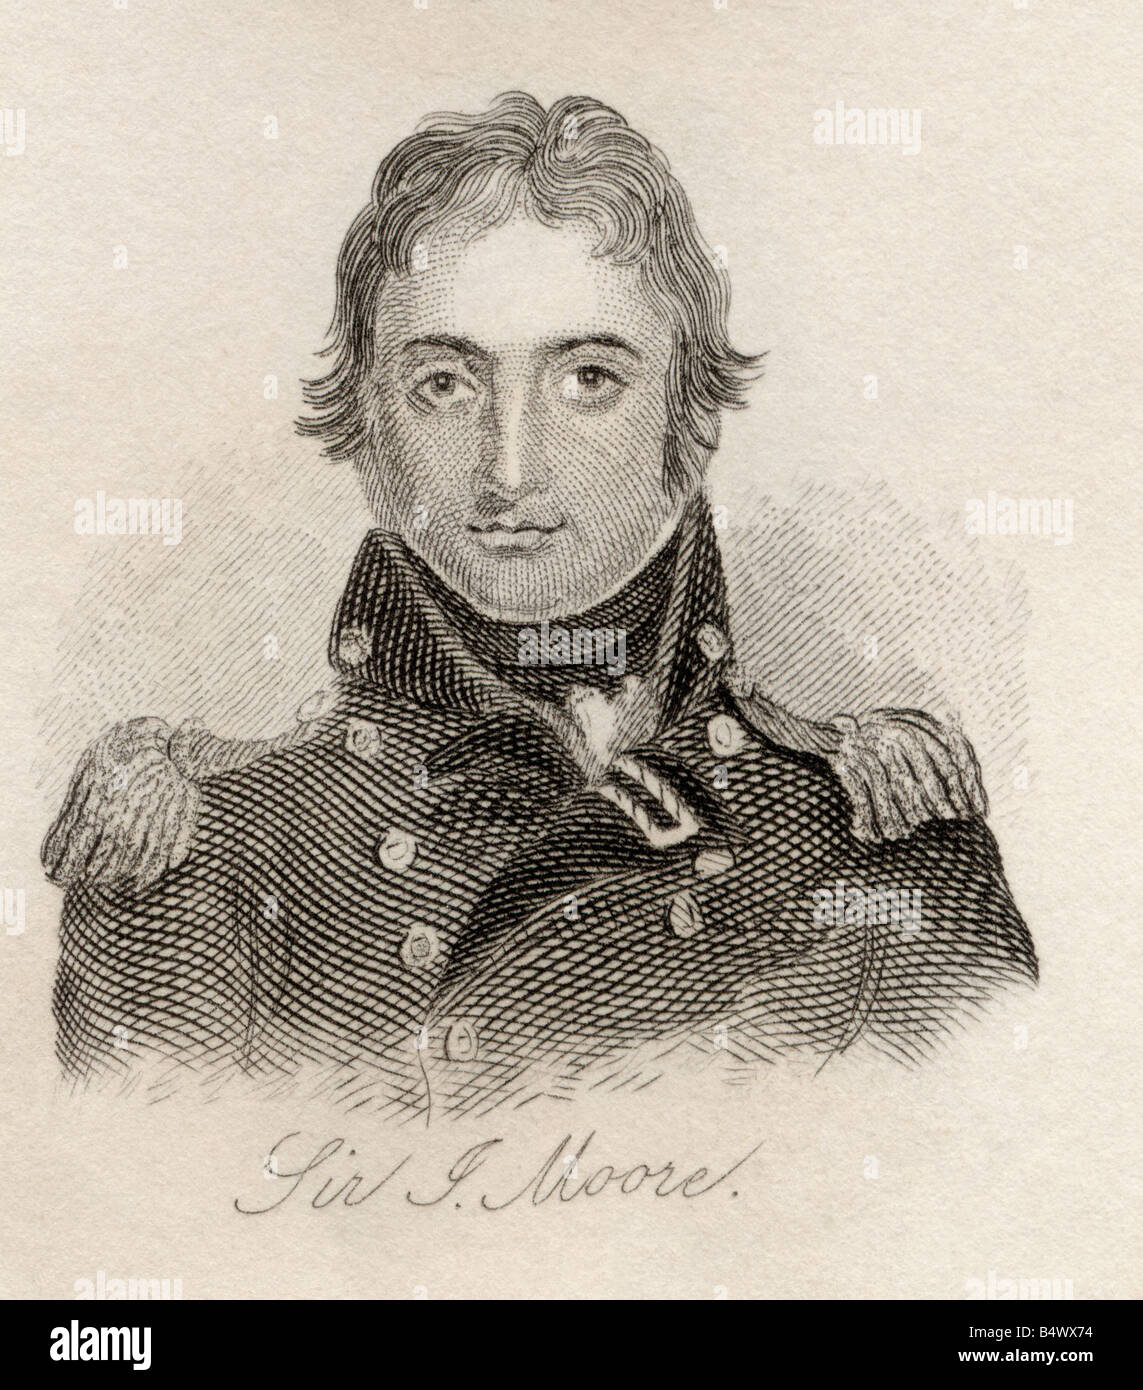 Sir John Moore, 1761 to 1809. British soldier and General. From the book, Crabbs Historical Dictionary published 1825. Stock Photo